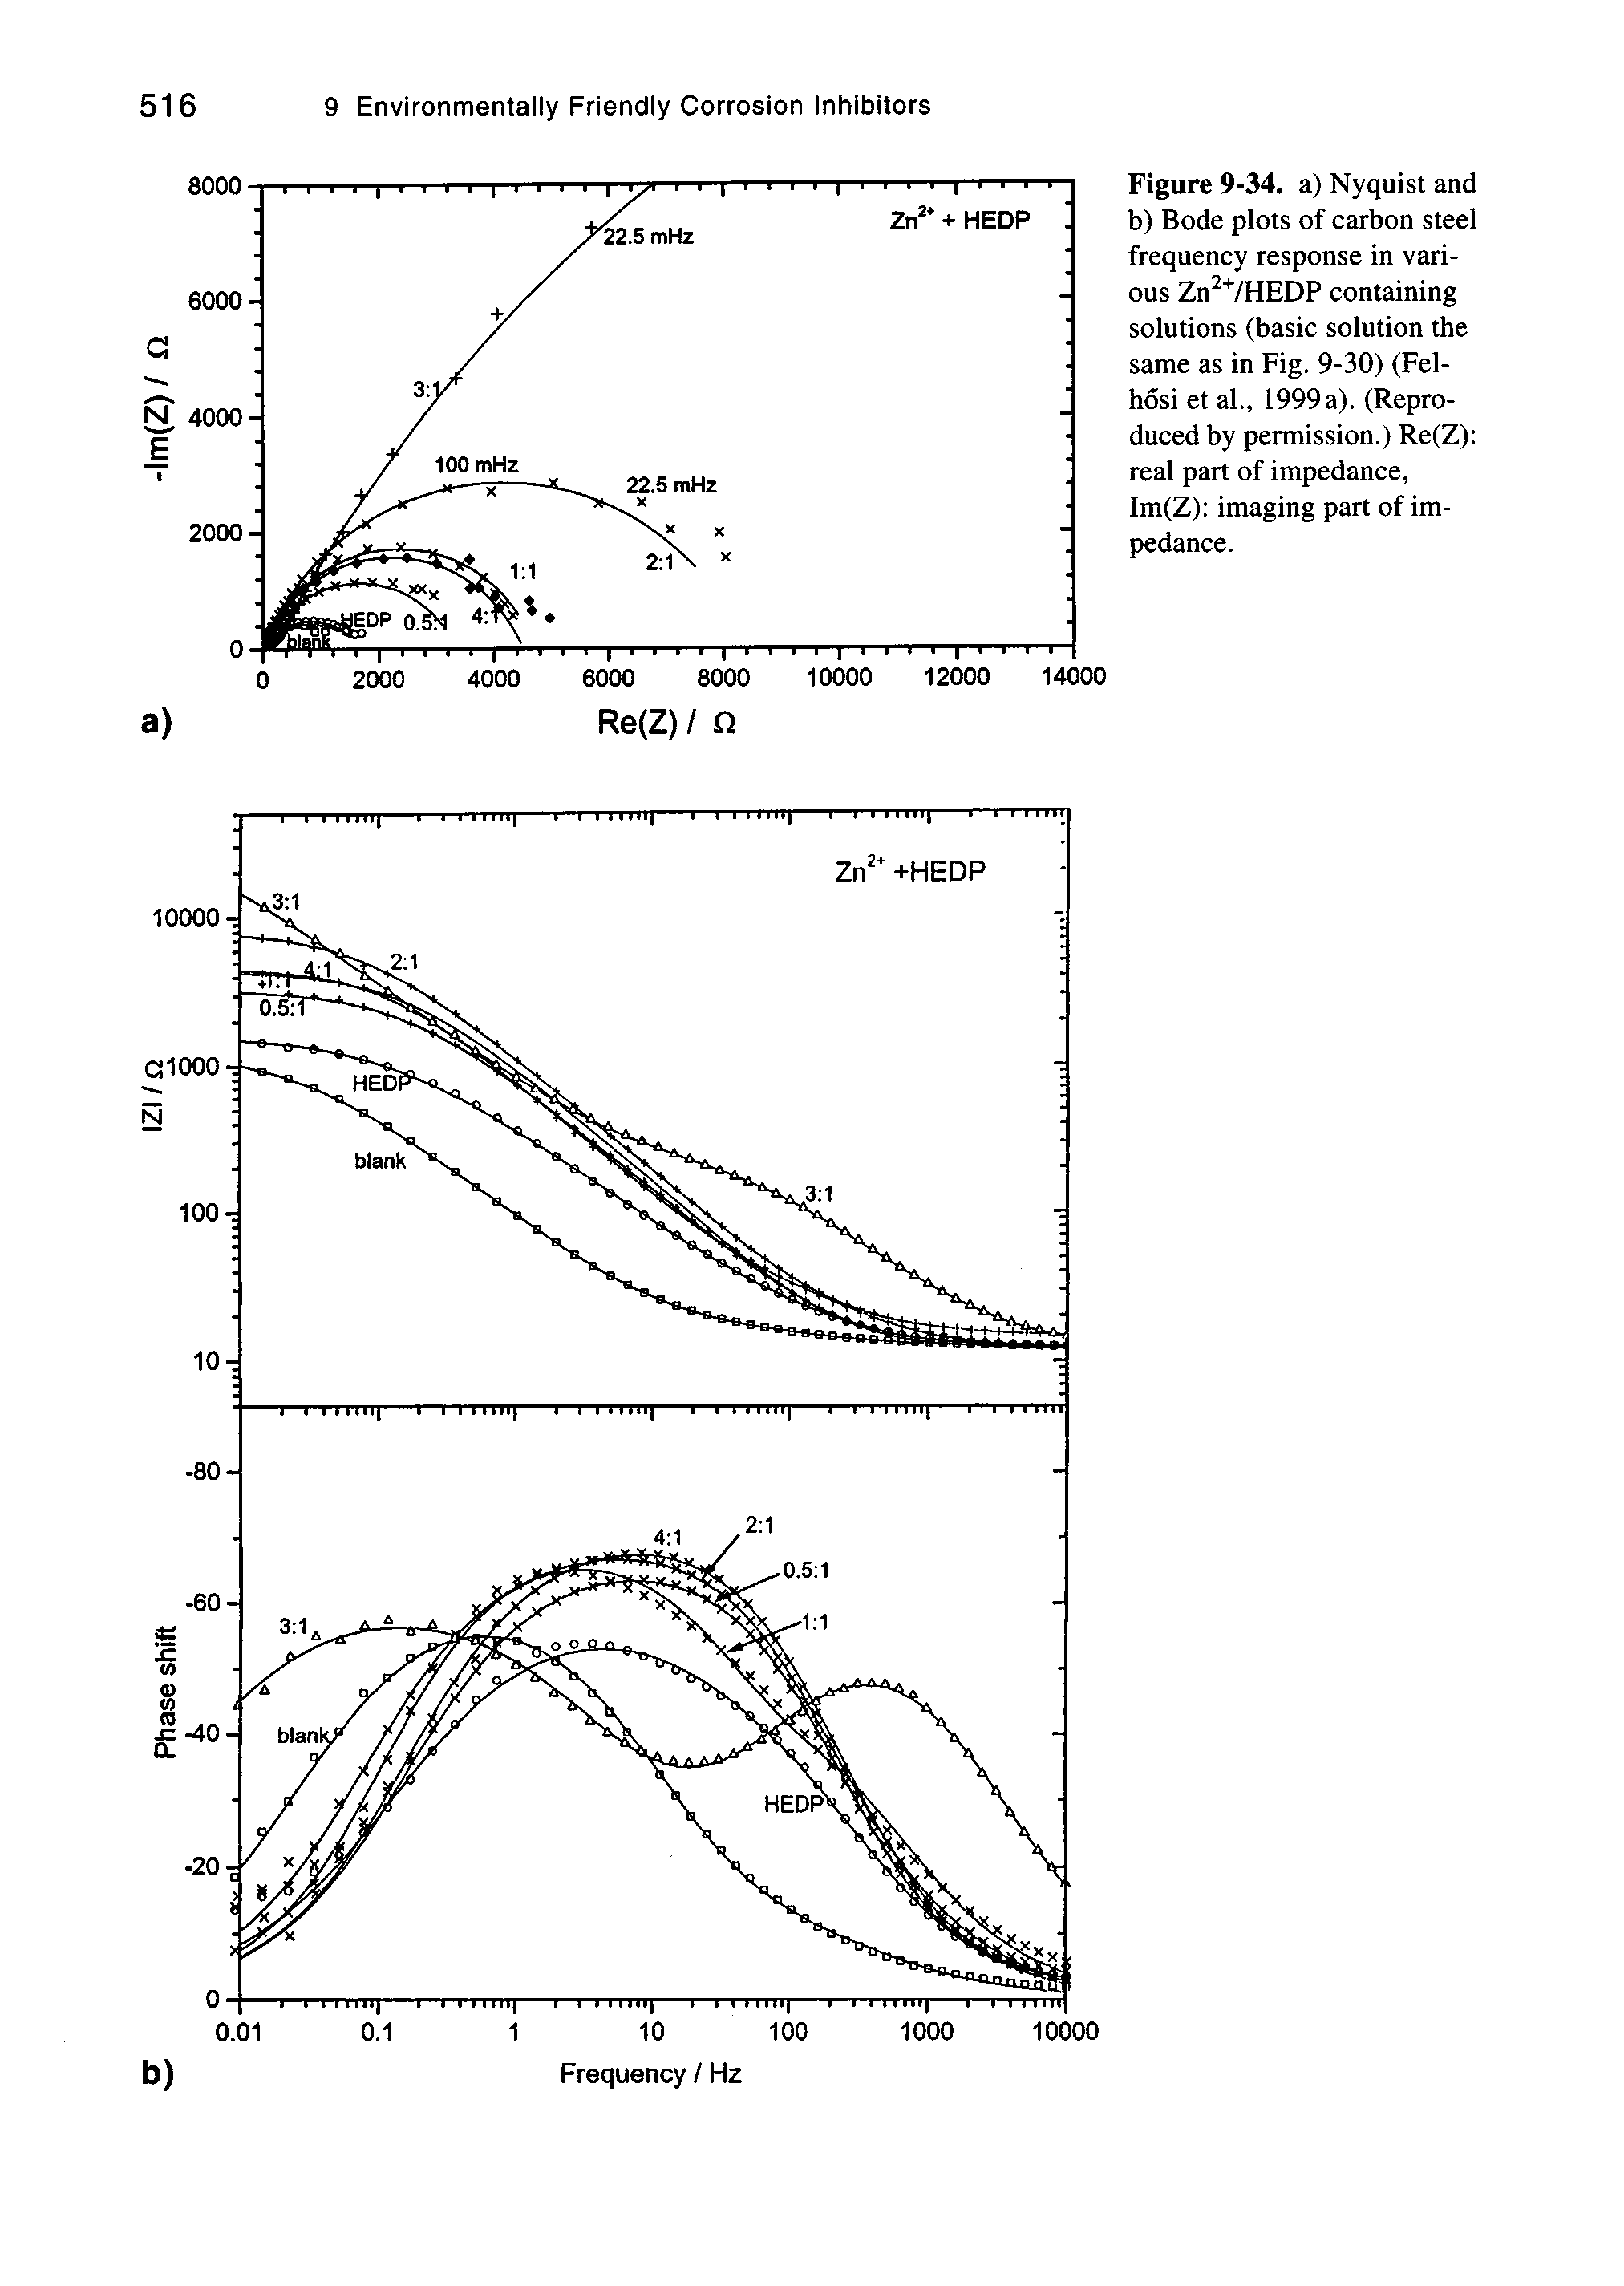 Figure 9-34. a) Nyquist and b) Bode plots of carbon steel frequency response in various Zn /HEDP containing solutions (basic solution the same as in Fig. 9-30) (Fel-hosi et al., 1999 a). (Reproduced by permission.) Re(Z) real part of impedance, Im(Z) imaging part of impedance.